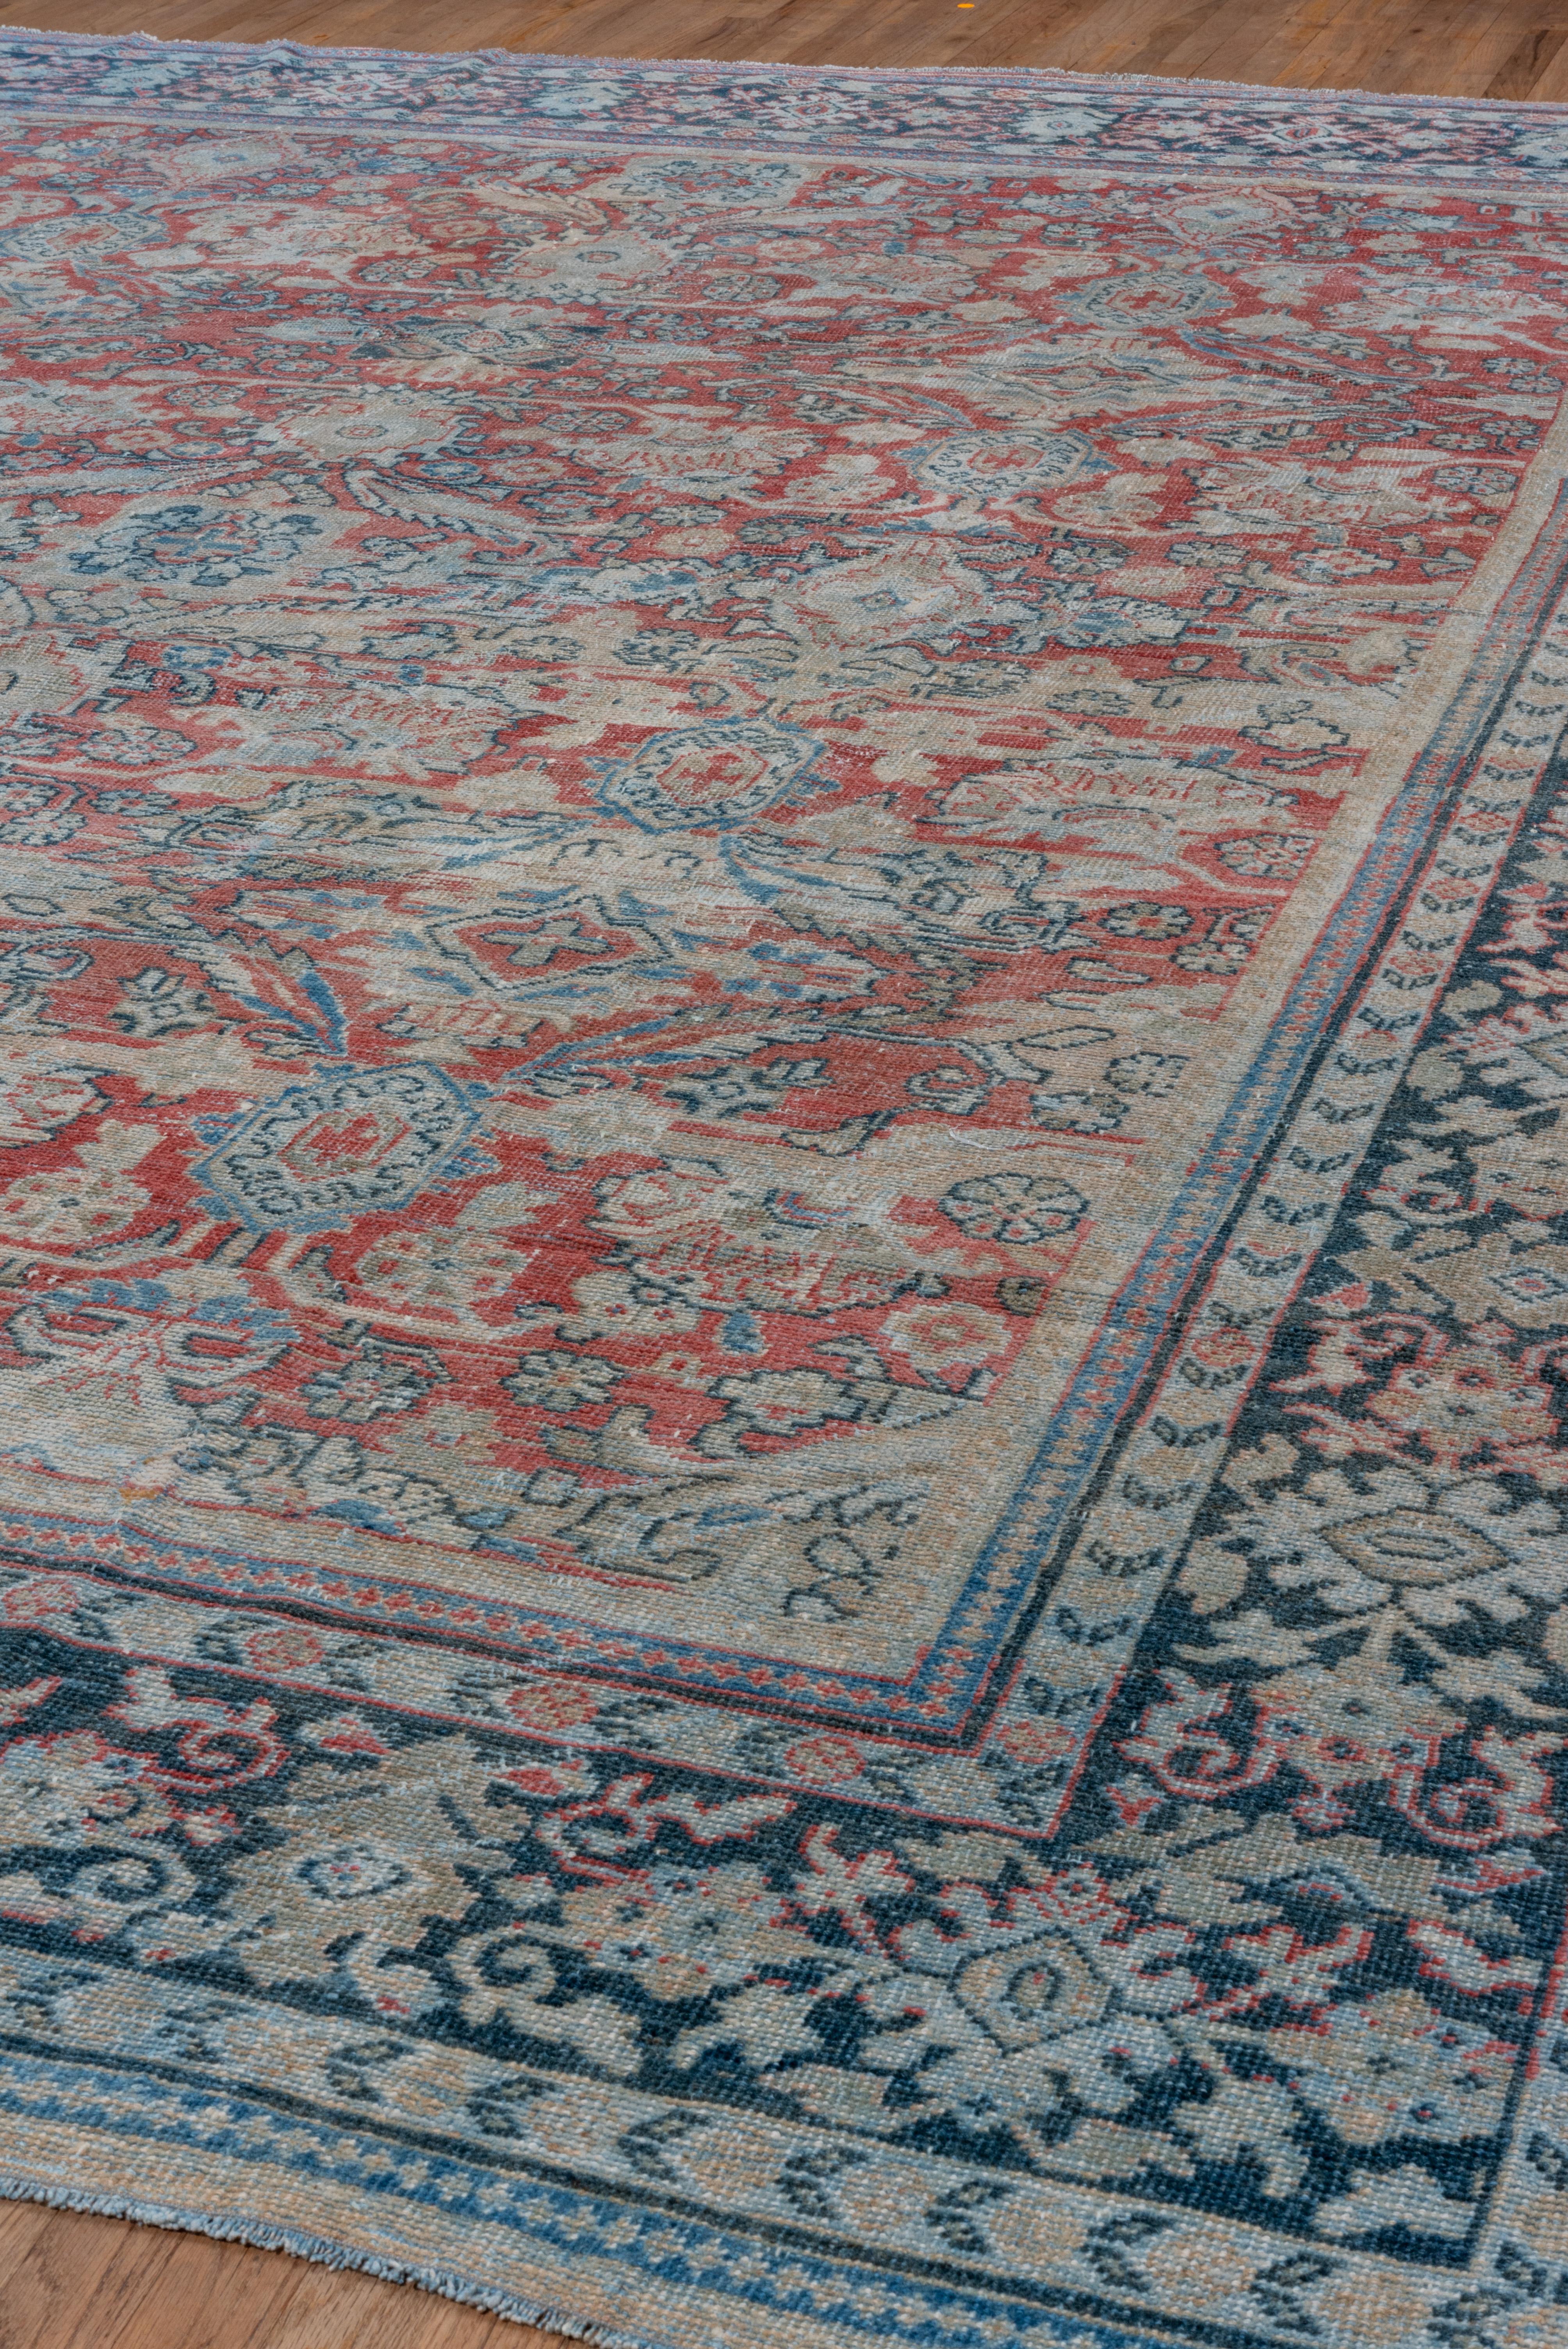 Tribal Lightly Distressed Antique Red Persian Mahal Rug, Blue Borders, All-Over Field For Sale